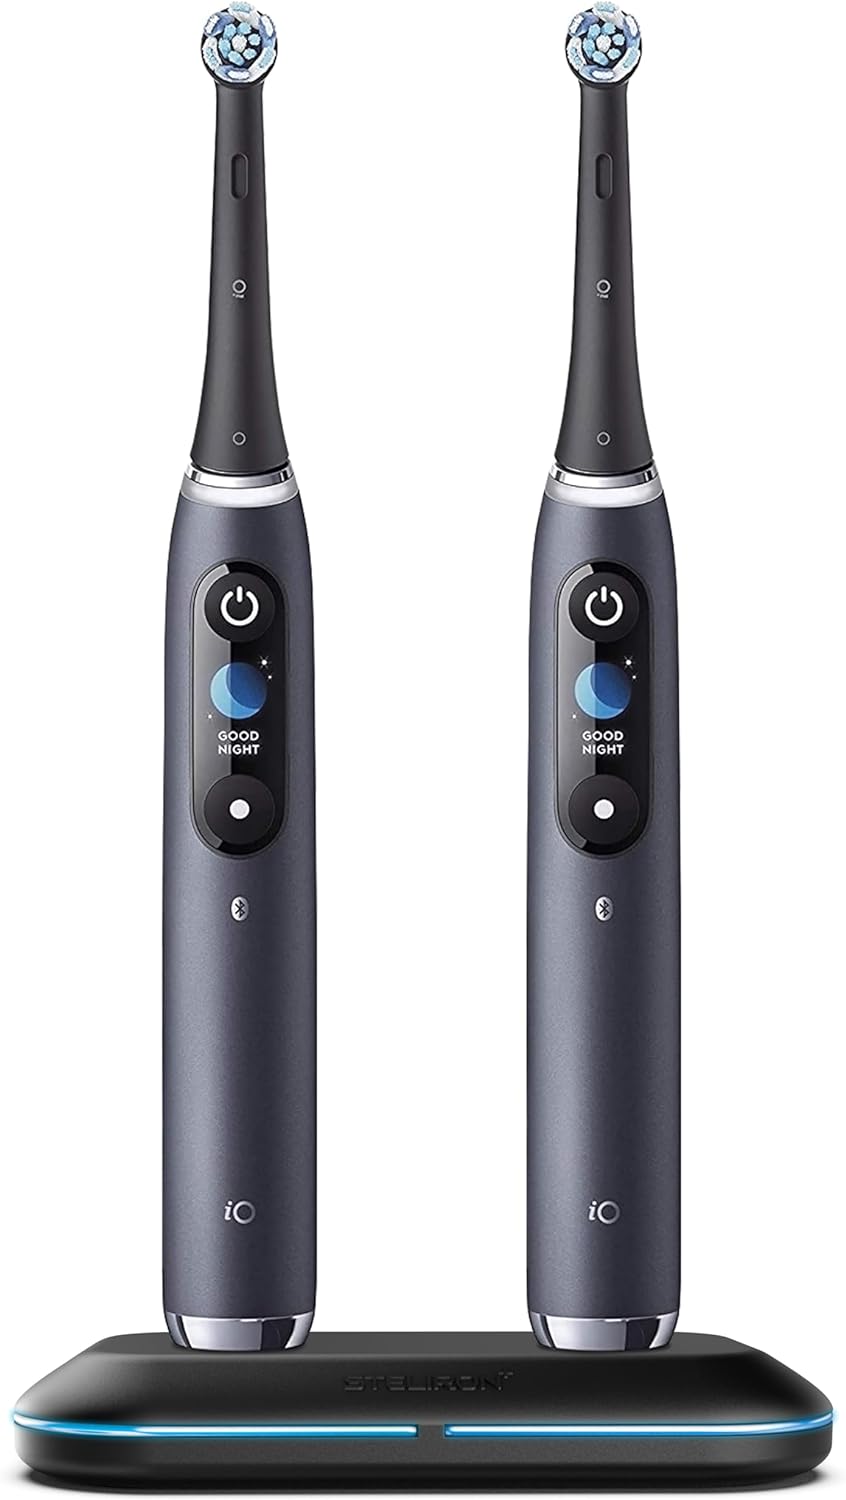 Universal Electric Toothbrush Charger - Compatible with Philips Sonicare and Oral-B Models, Single/Dual Charging Ports